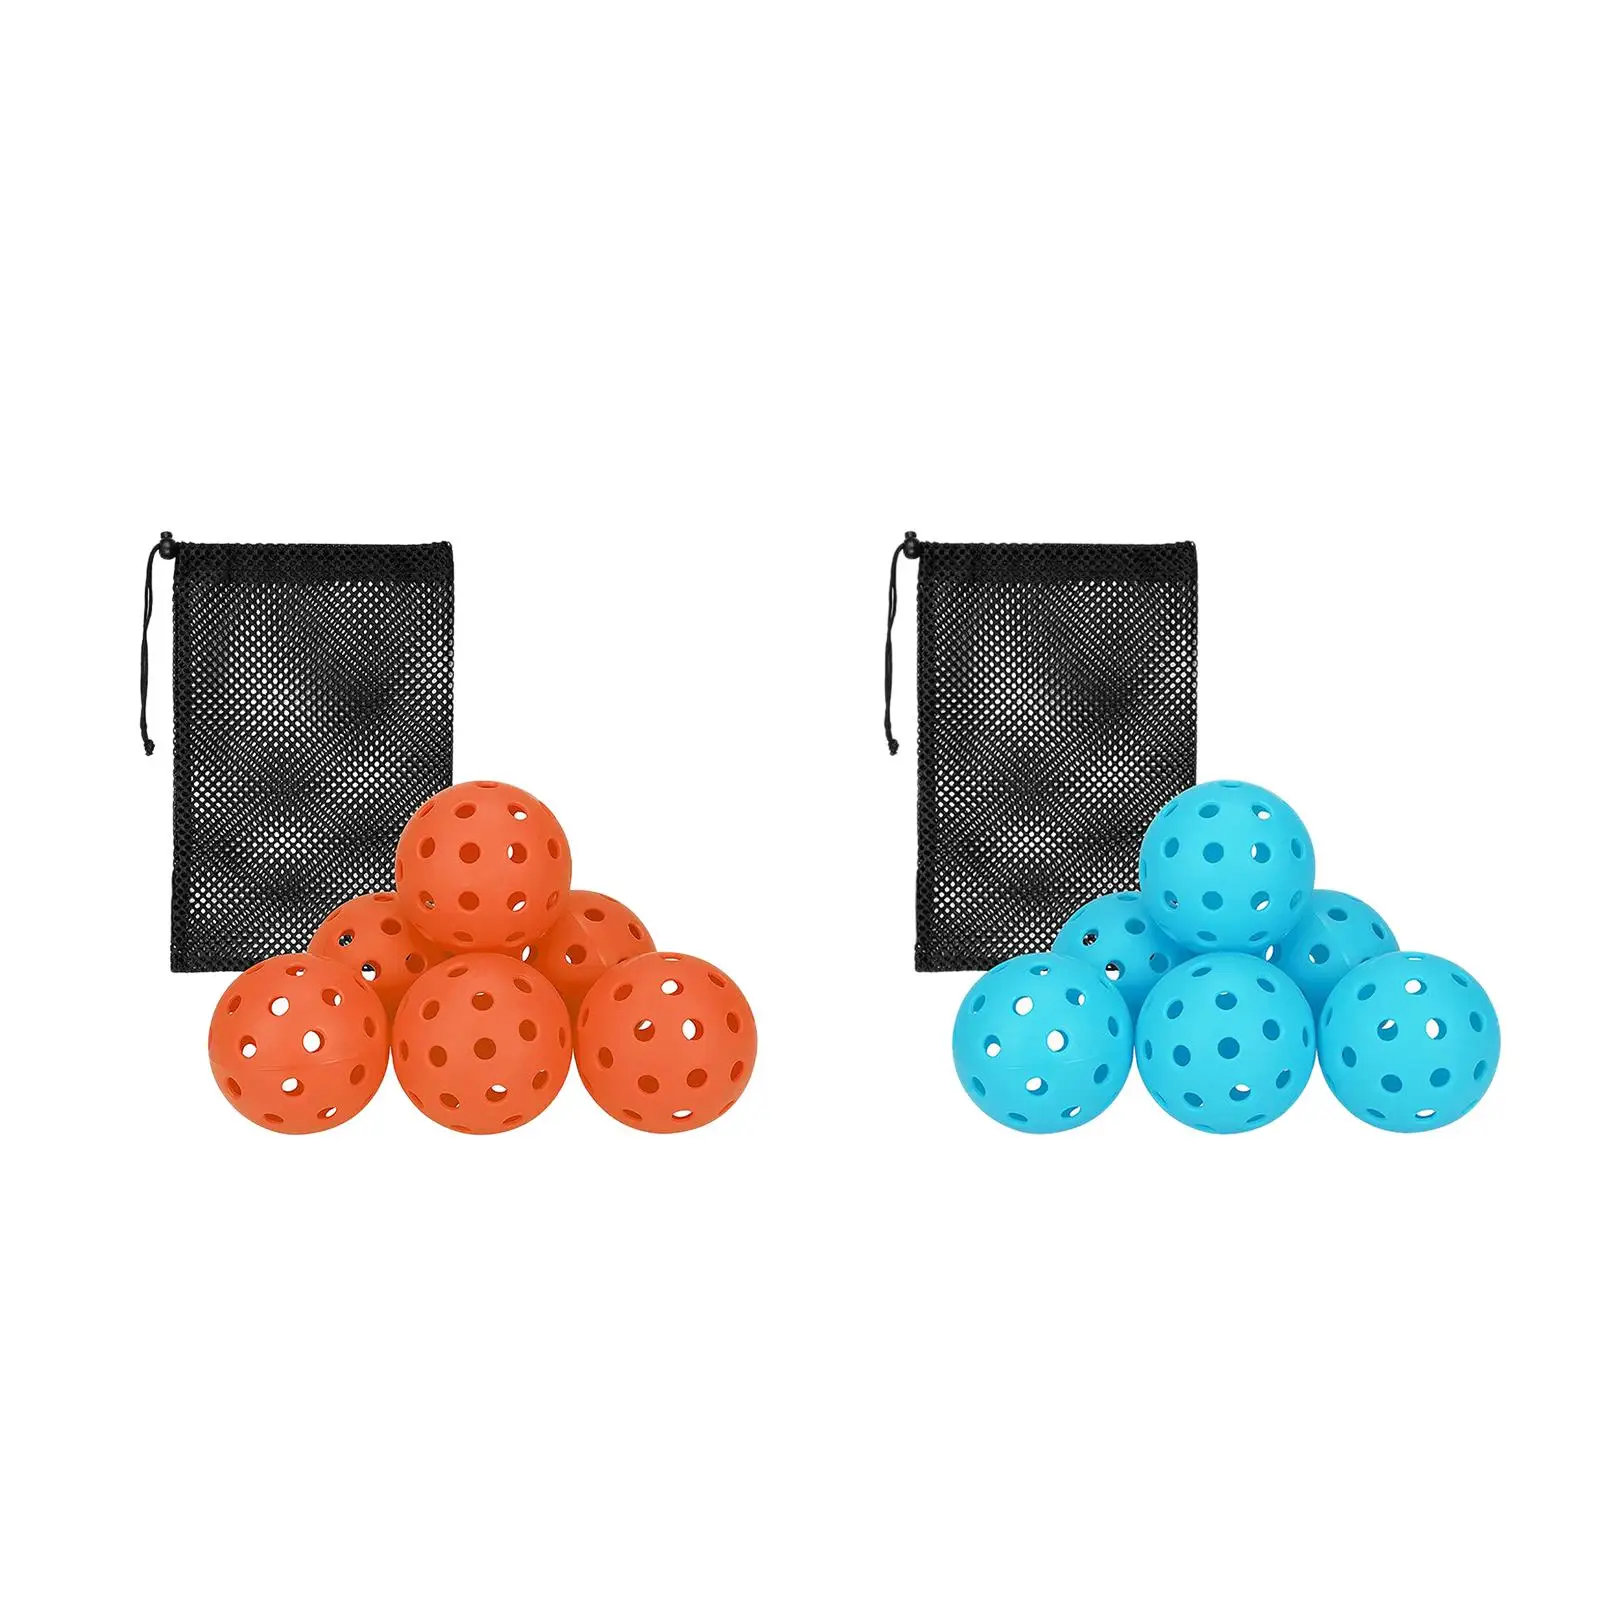 

6x 40 Holes Pickleball Balls Accessories Durable Recreational Pickle Balls for Adult Sanctioned Tournament Play Indoor Outdoor